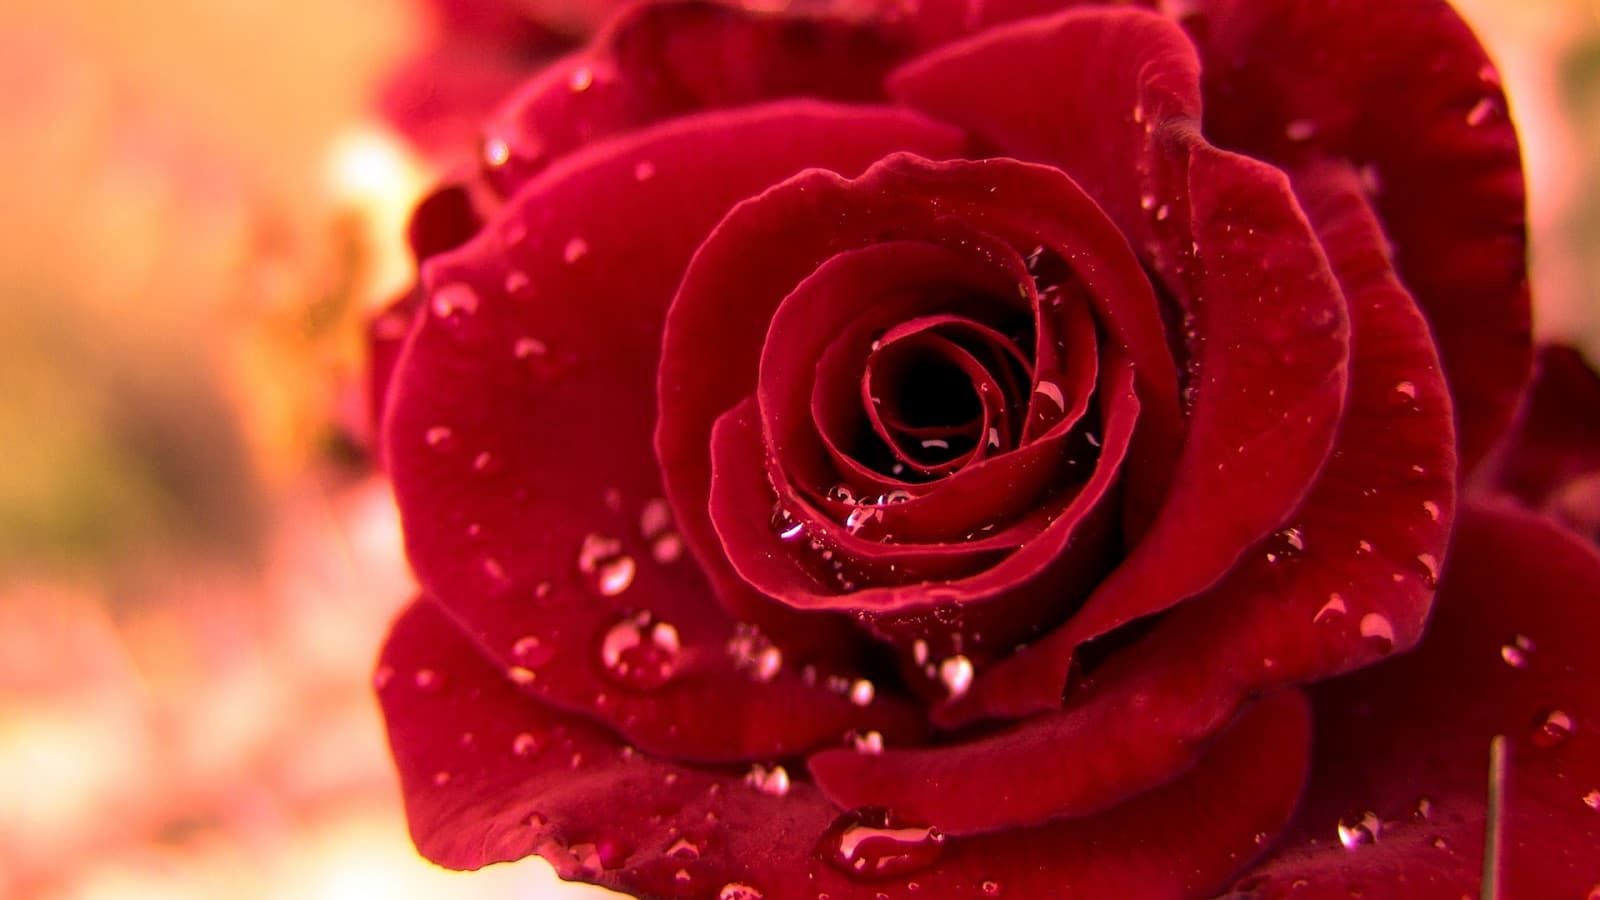 Beauty of red rose 1